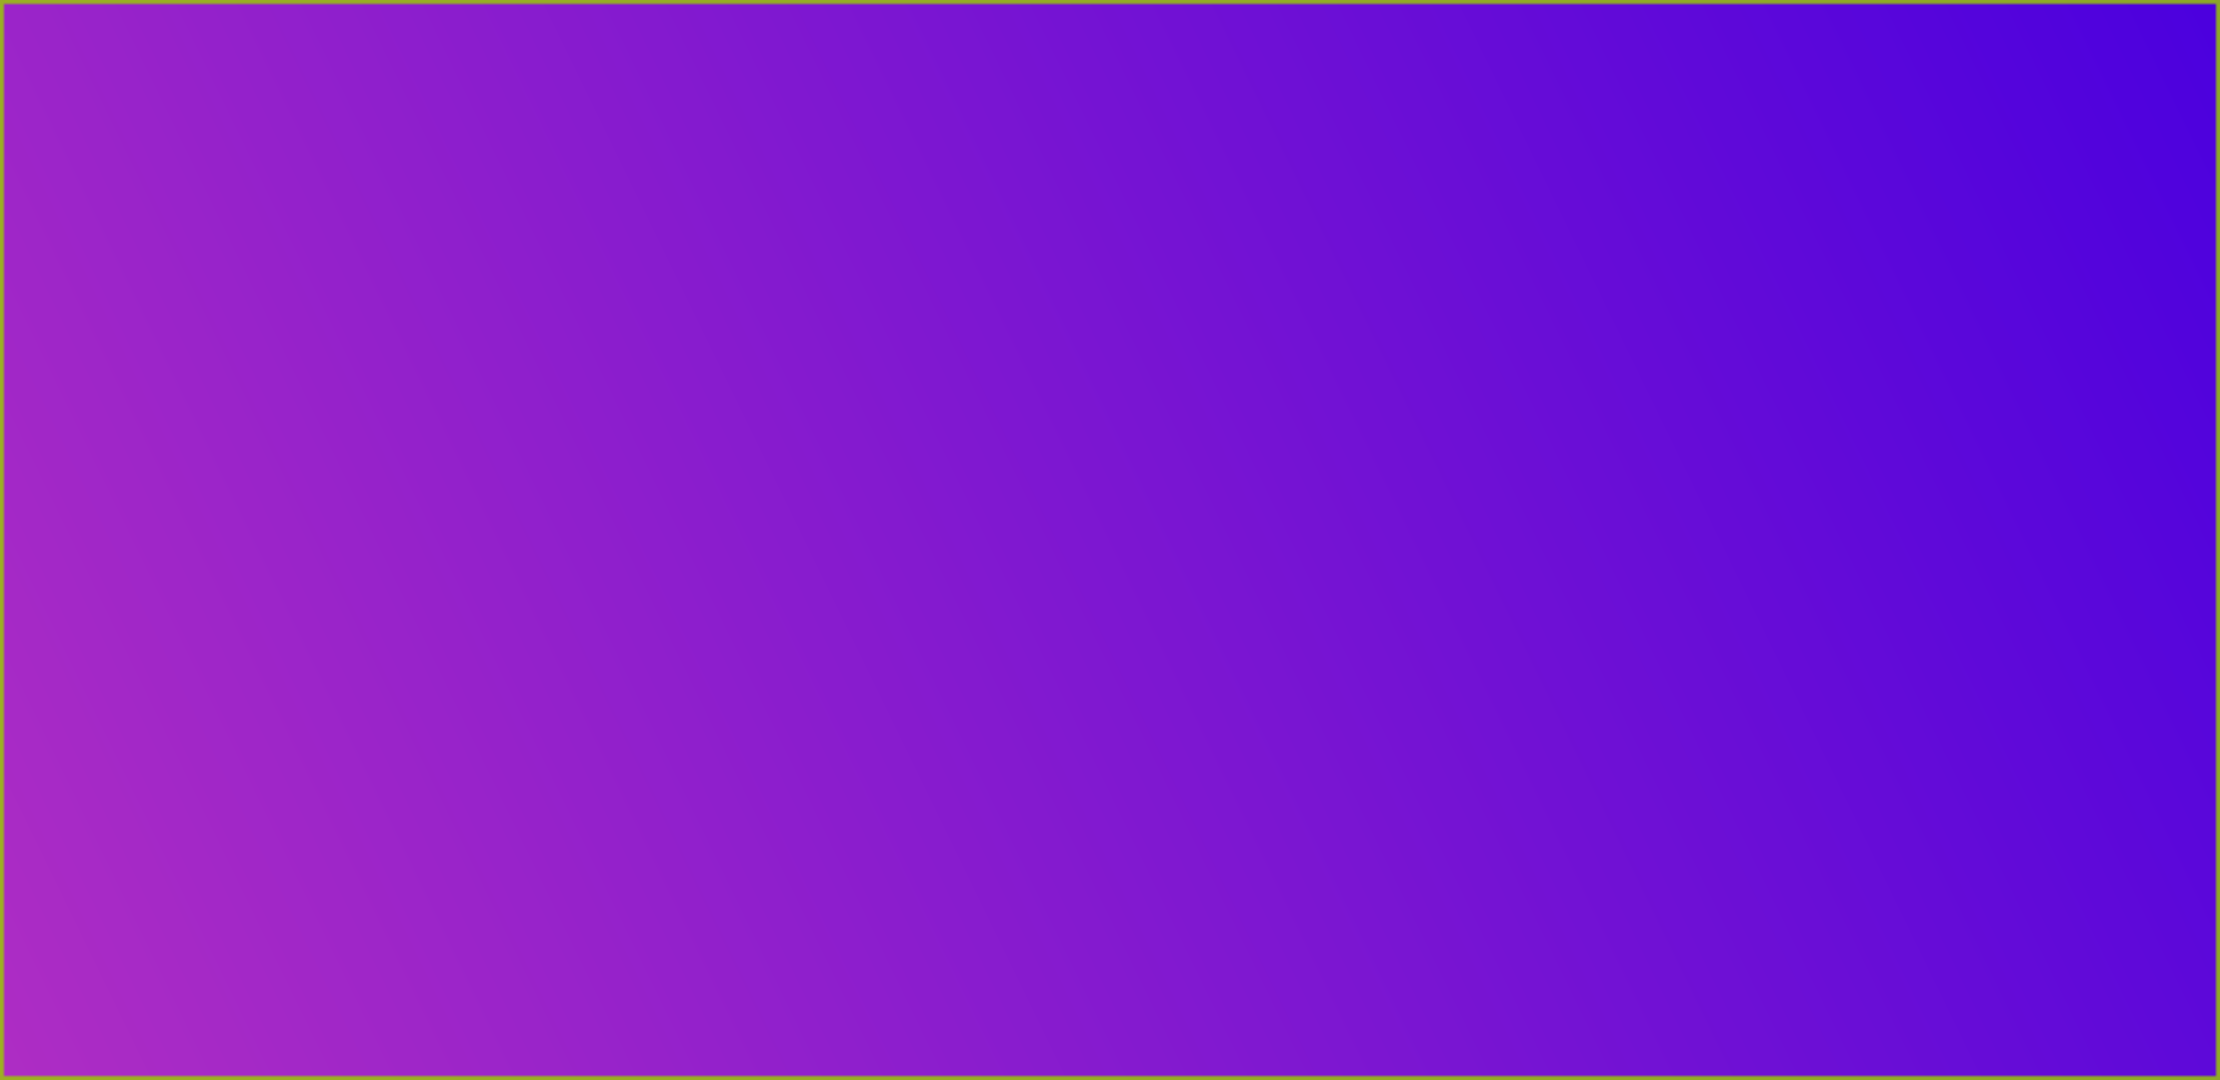 Soothing pink to purple gradient background